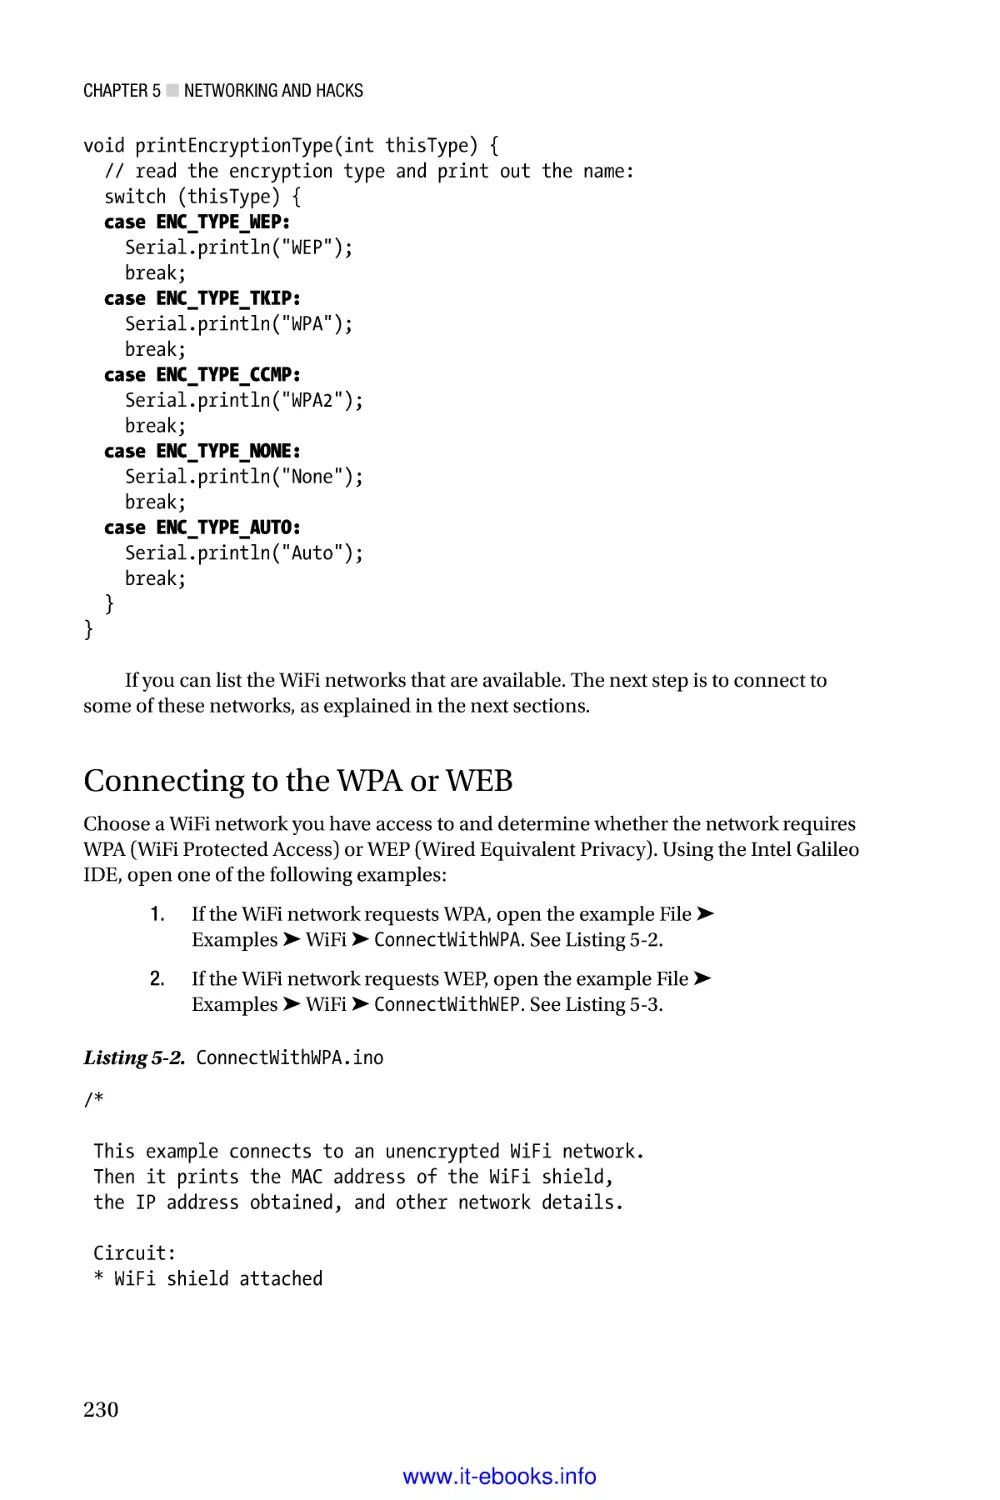 Connecting to the WPA or WEB